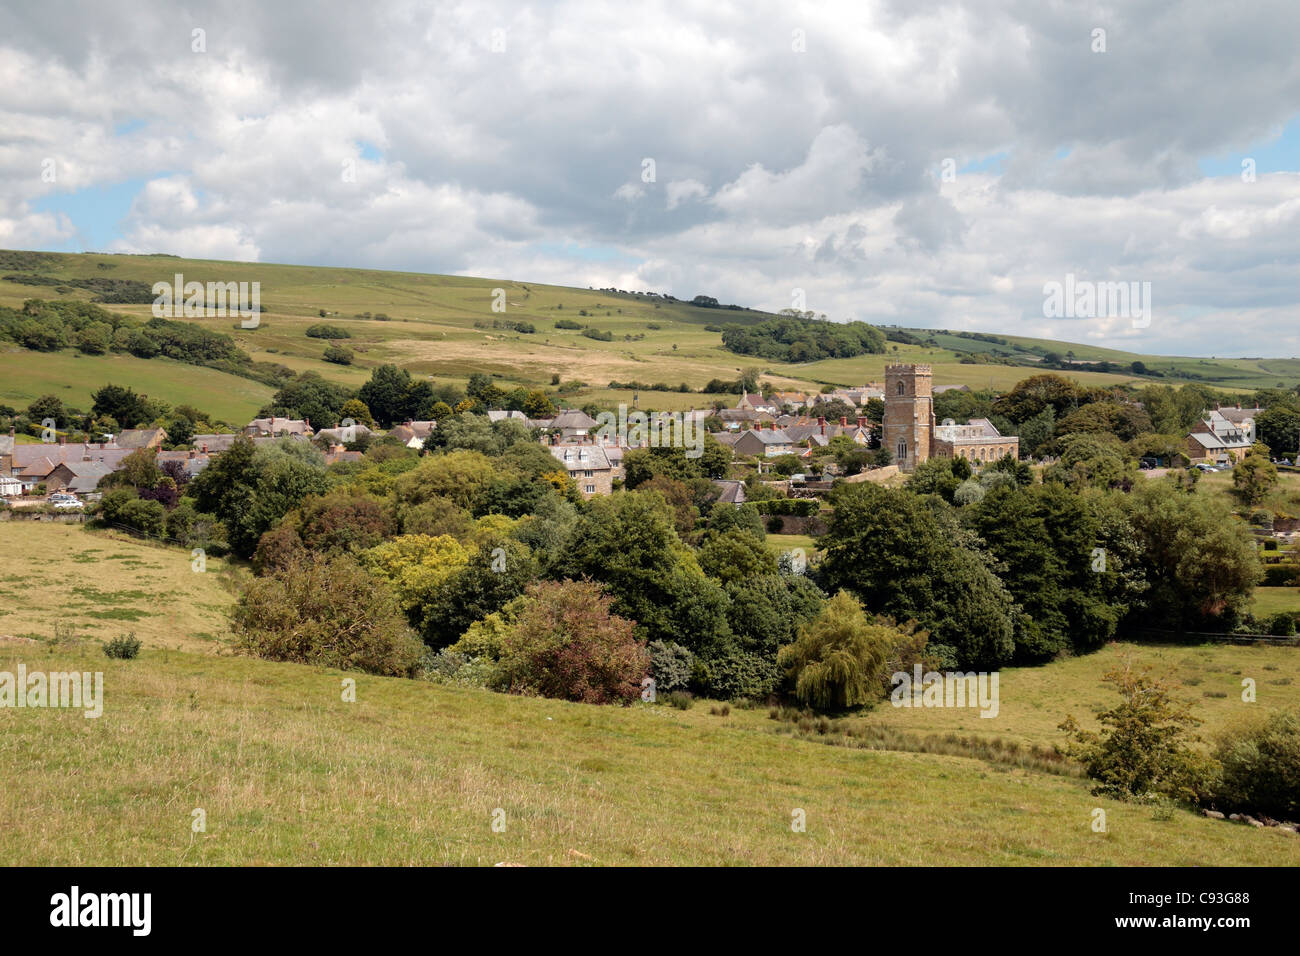 View from a hilltop overlooking the pretty village of Abbotsbury, Dorset, UK. Stock Photo